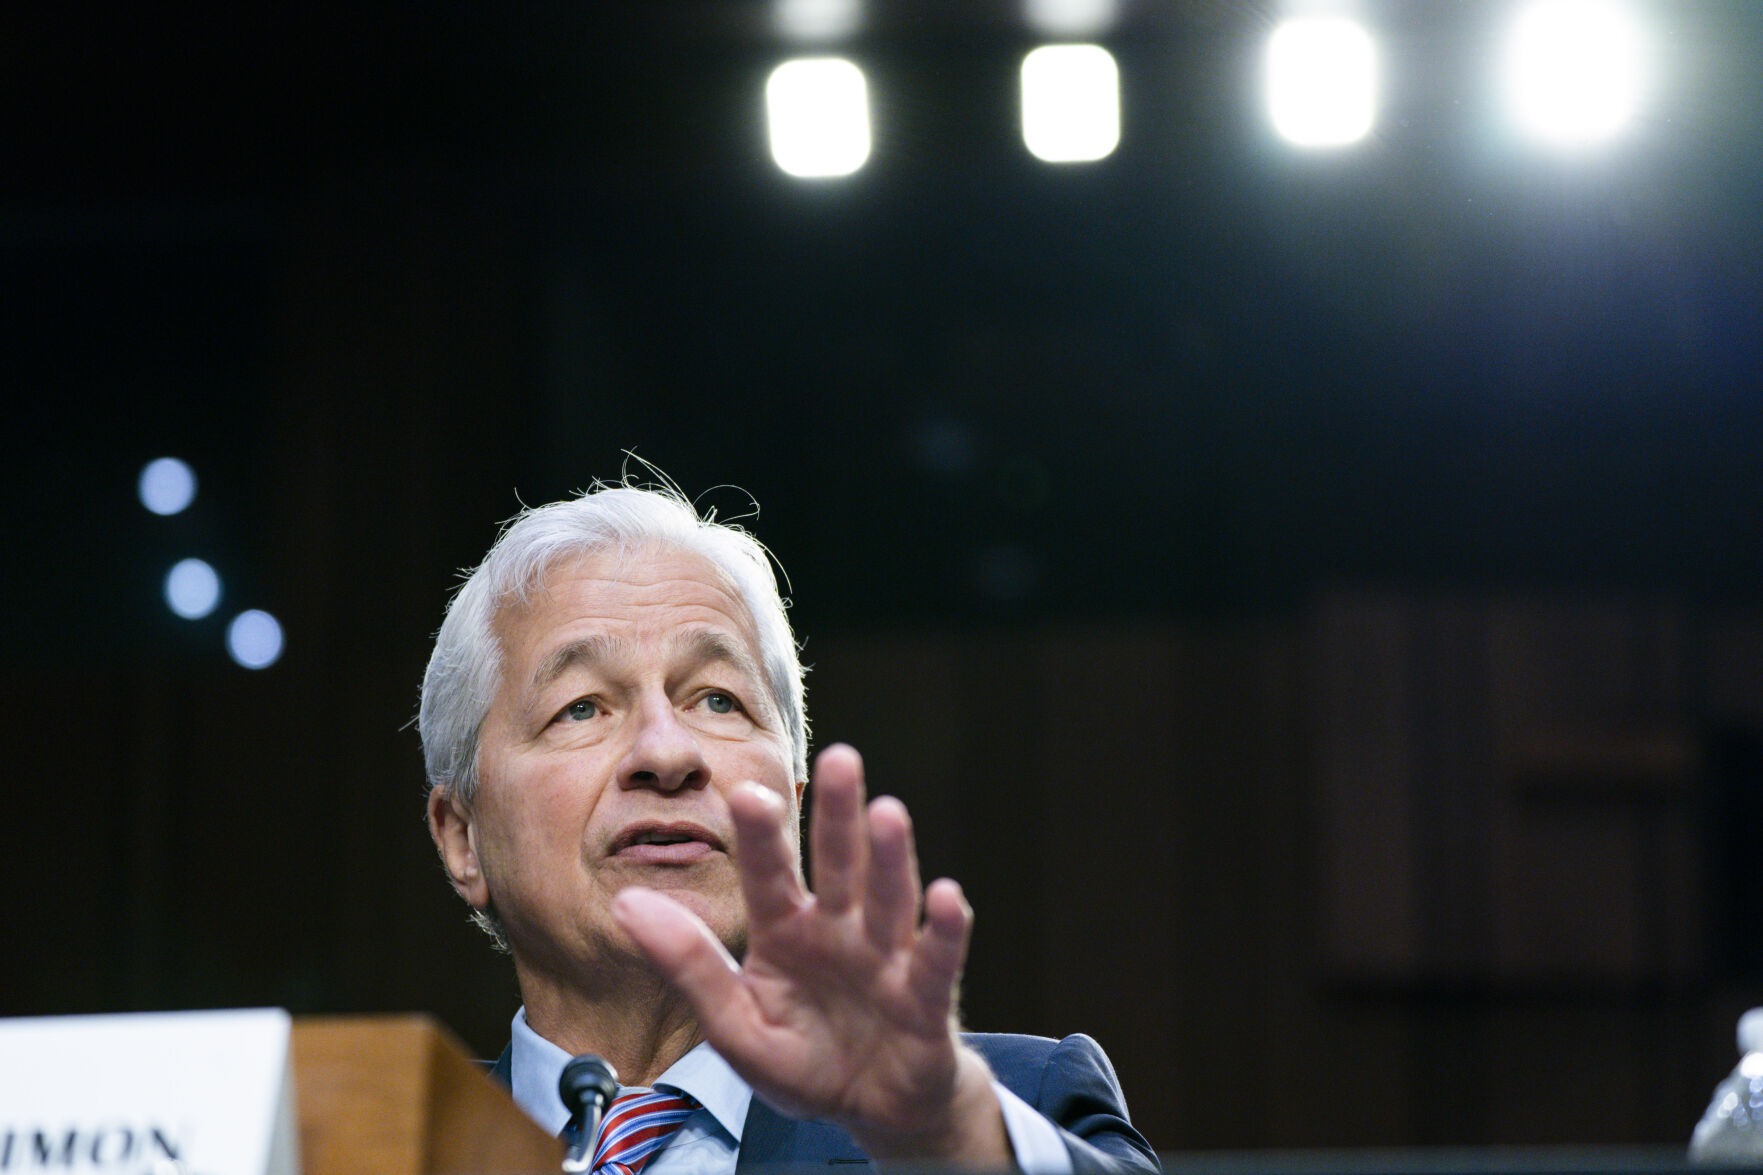 <p>FILE - JPMorgan Chase & Company Chairman and CEO Jamie Dimon testifies at a Senate Banking Committee annual Wall Street oversight hearing, Thursday, Sept. 22, 2022, on Capitol Hill in Washington. JPMorgan Chase’s third-quarter profit soared 35% from last year, fueled by a rapid rise in interest rates, but Dimon, issued a sobering statement about the current state of world affairs and economic instability, Friday, Oct. 13, 2023. (AP Photo/Jacquelyn Martin, File)</p>   PHOTO CREDIT: Jacquelyn Martin - staff, ASSOCIATED PRESS